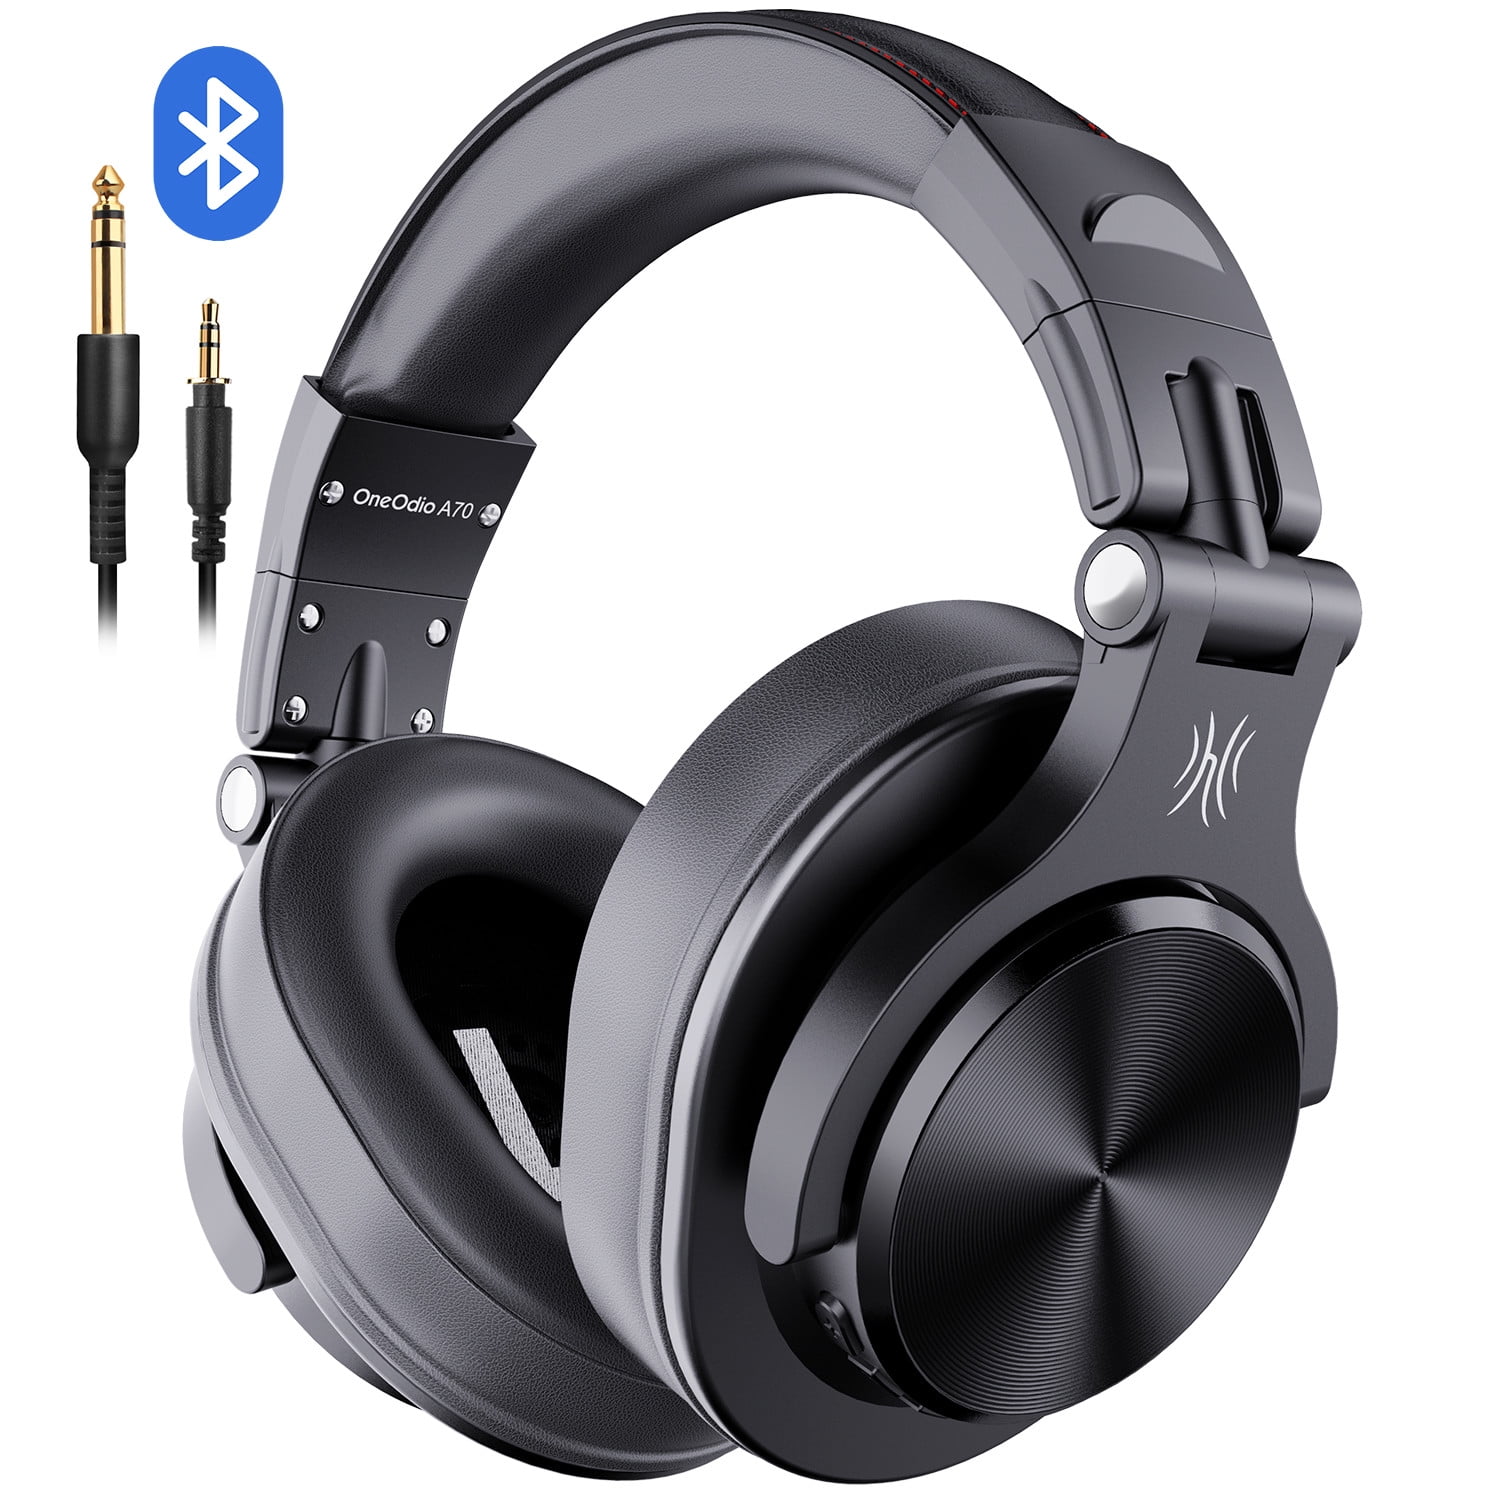  OneOdio A70 Bluetooth Over Ear Headphones, Wireless Headphones  w/ 72H Playtime, Hi-Res, 3.5mm/6.35mm Wired Audio Jack for Studio Monitor &  Mixing DJ Guitar AMP, Computer Laptop PC Tablet - Black 